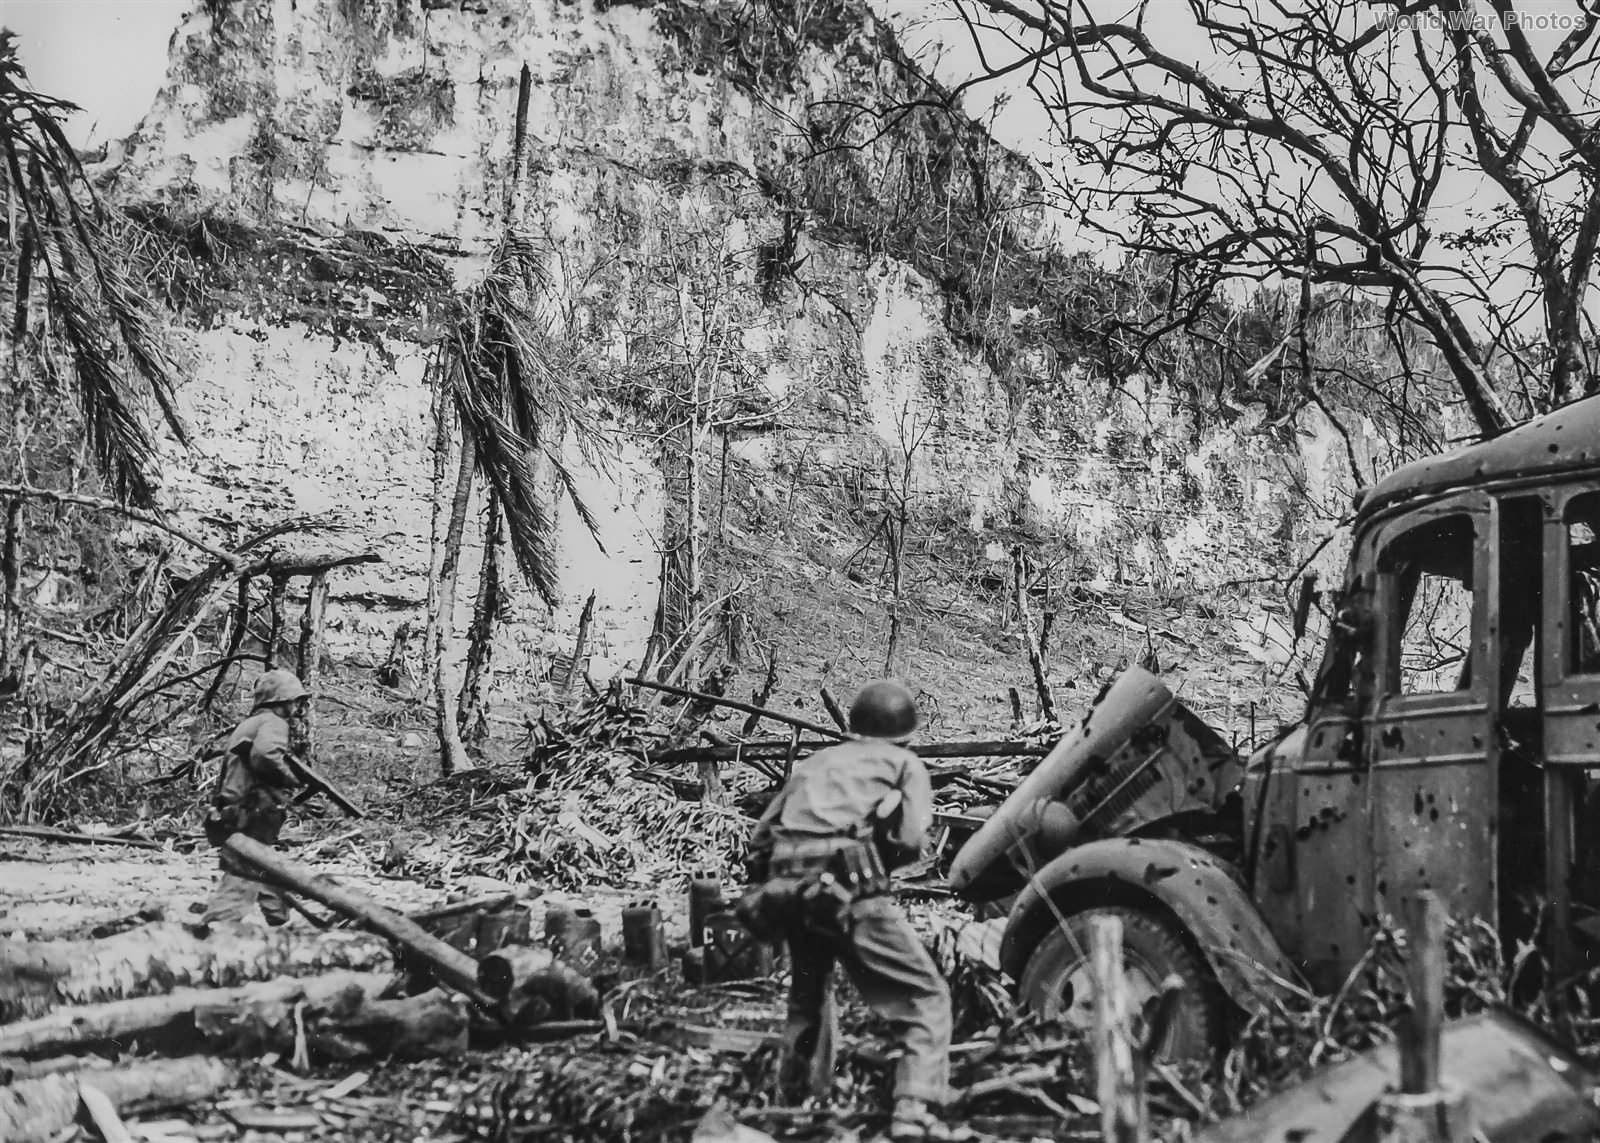 1st Marine Division Assault Across Airfield at Peleliu 44